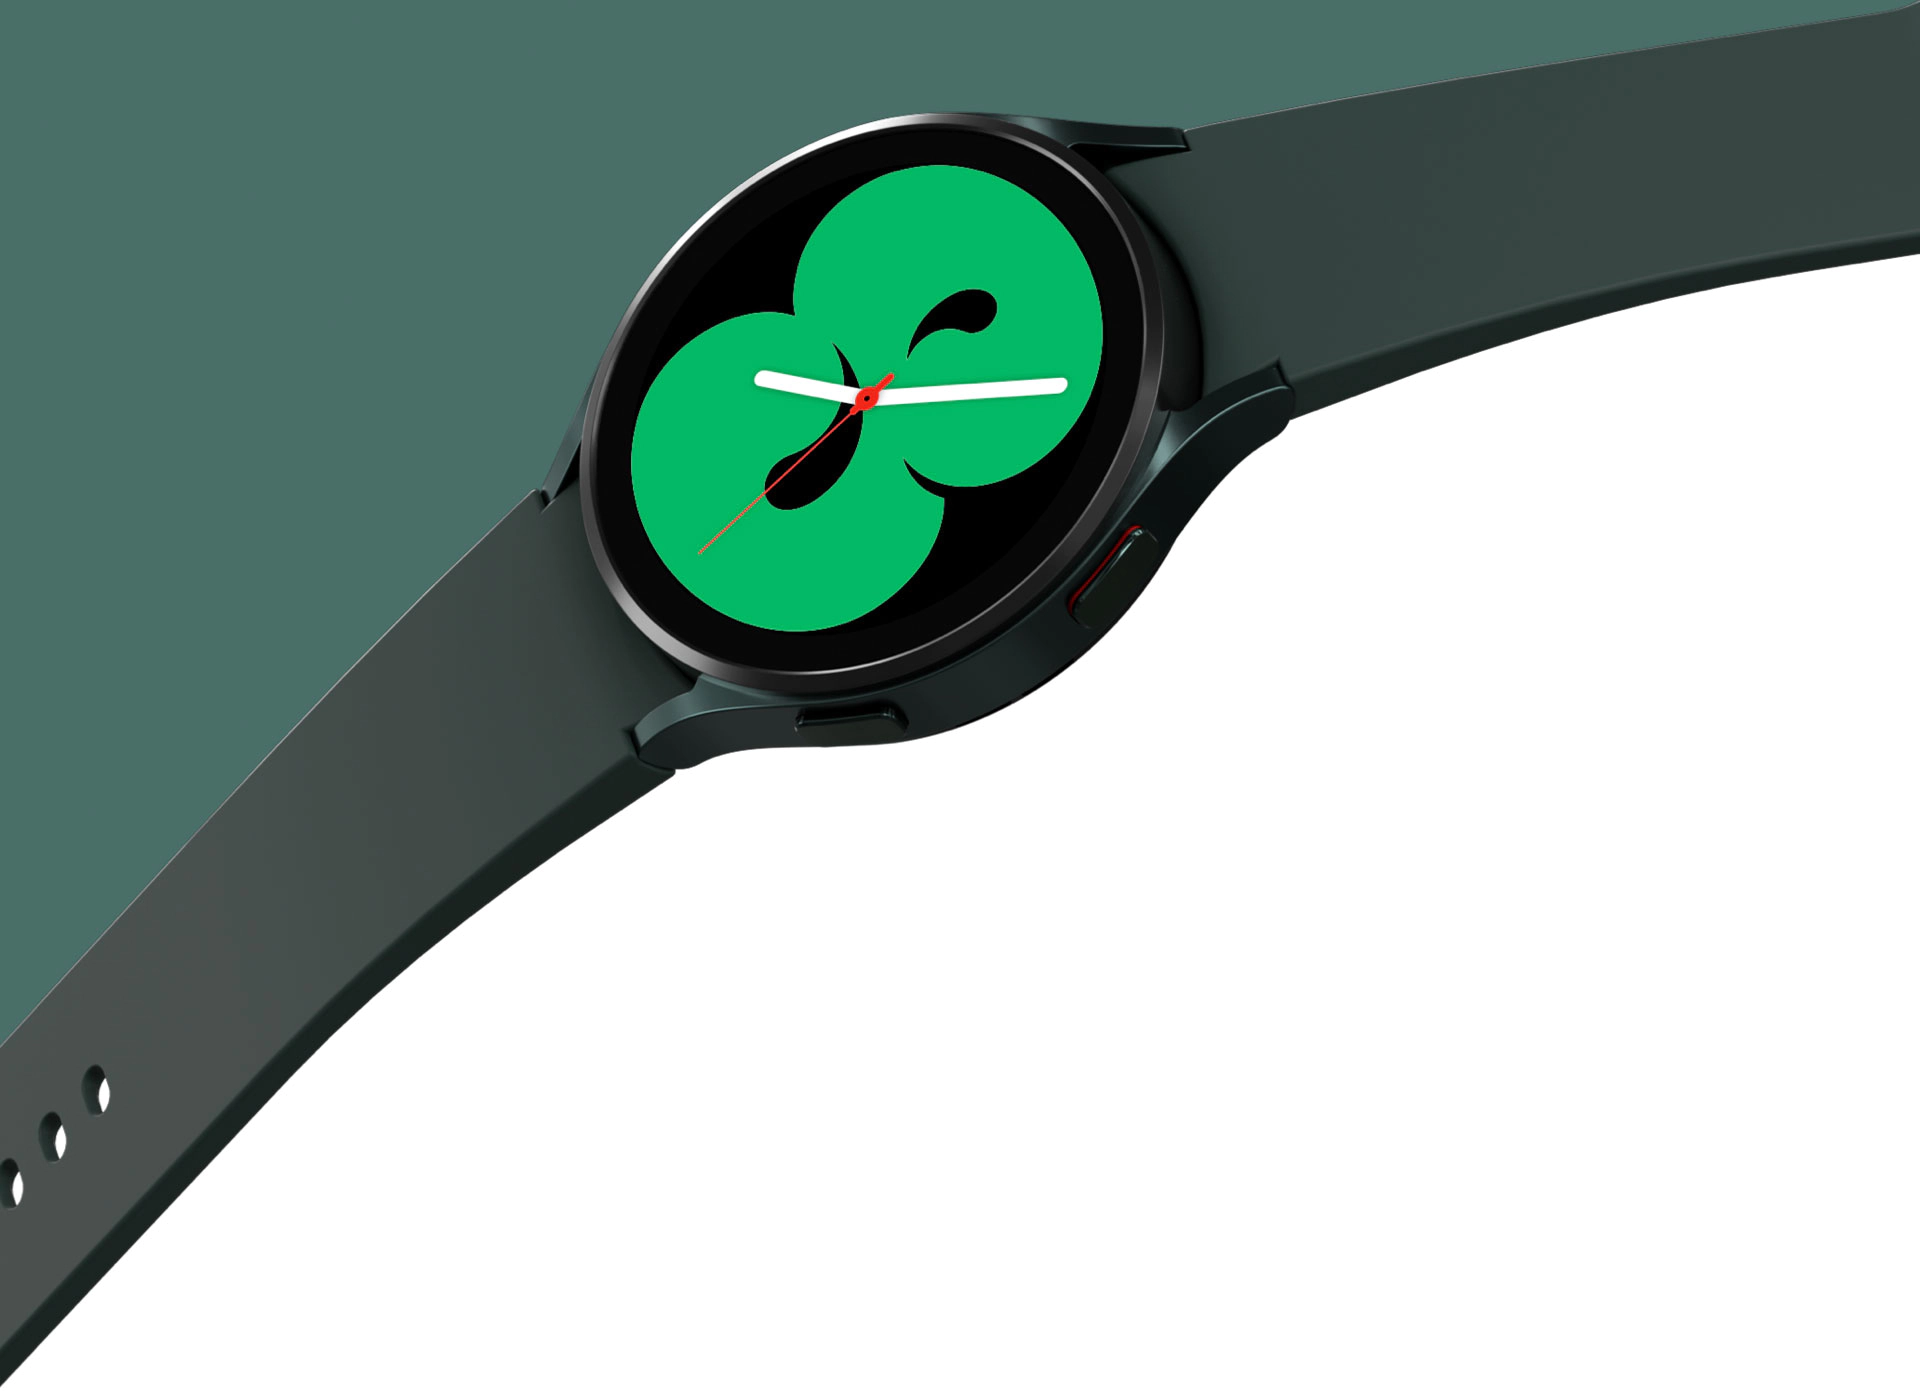 A green Galaxy Watch4 is displayed with a band that is spread wide. The watch face shows one of the designs that displays the time in a green color.